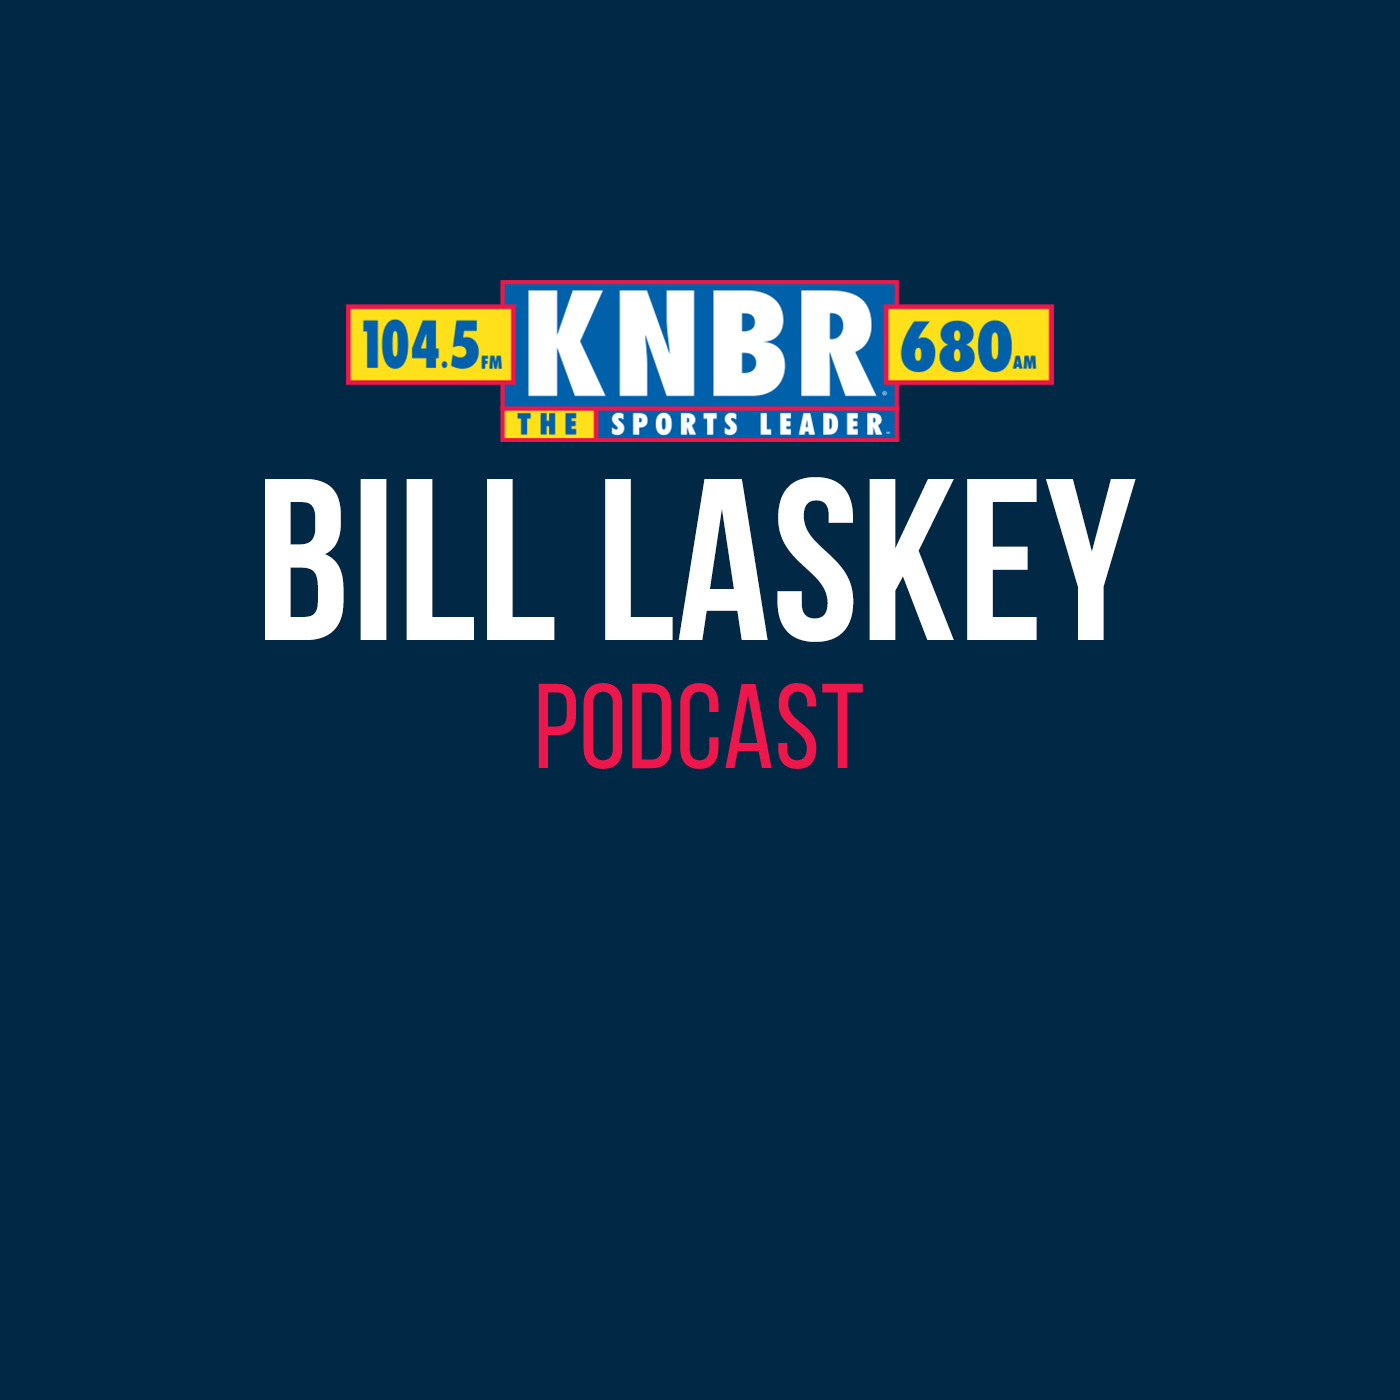 4-21 Gary Lavelle joins Bill Laskey on Extra Innings to discuss his playing career and the state of the current Giants